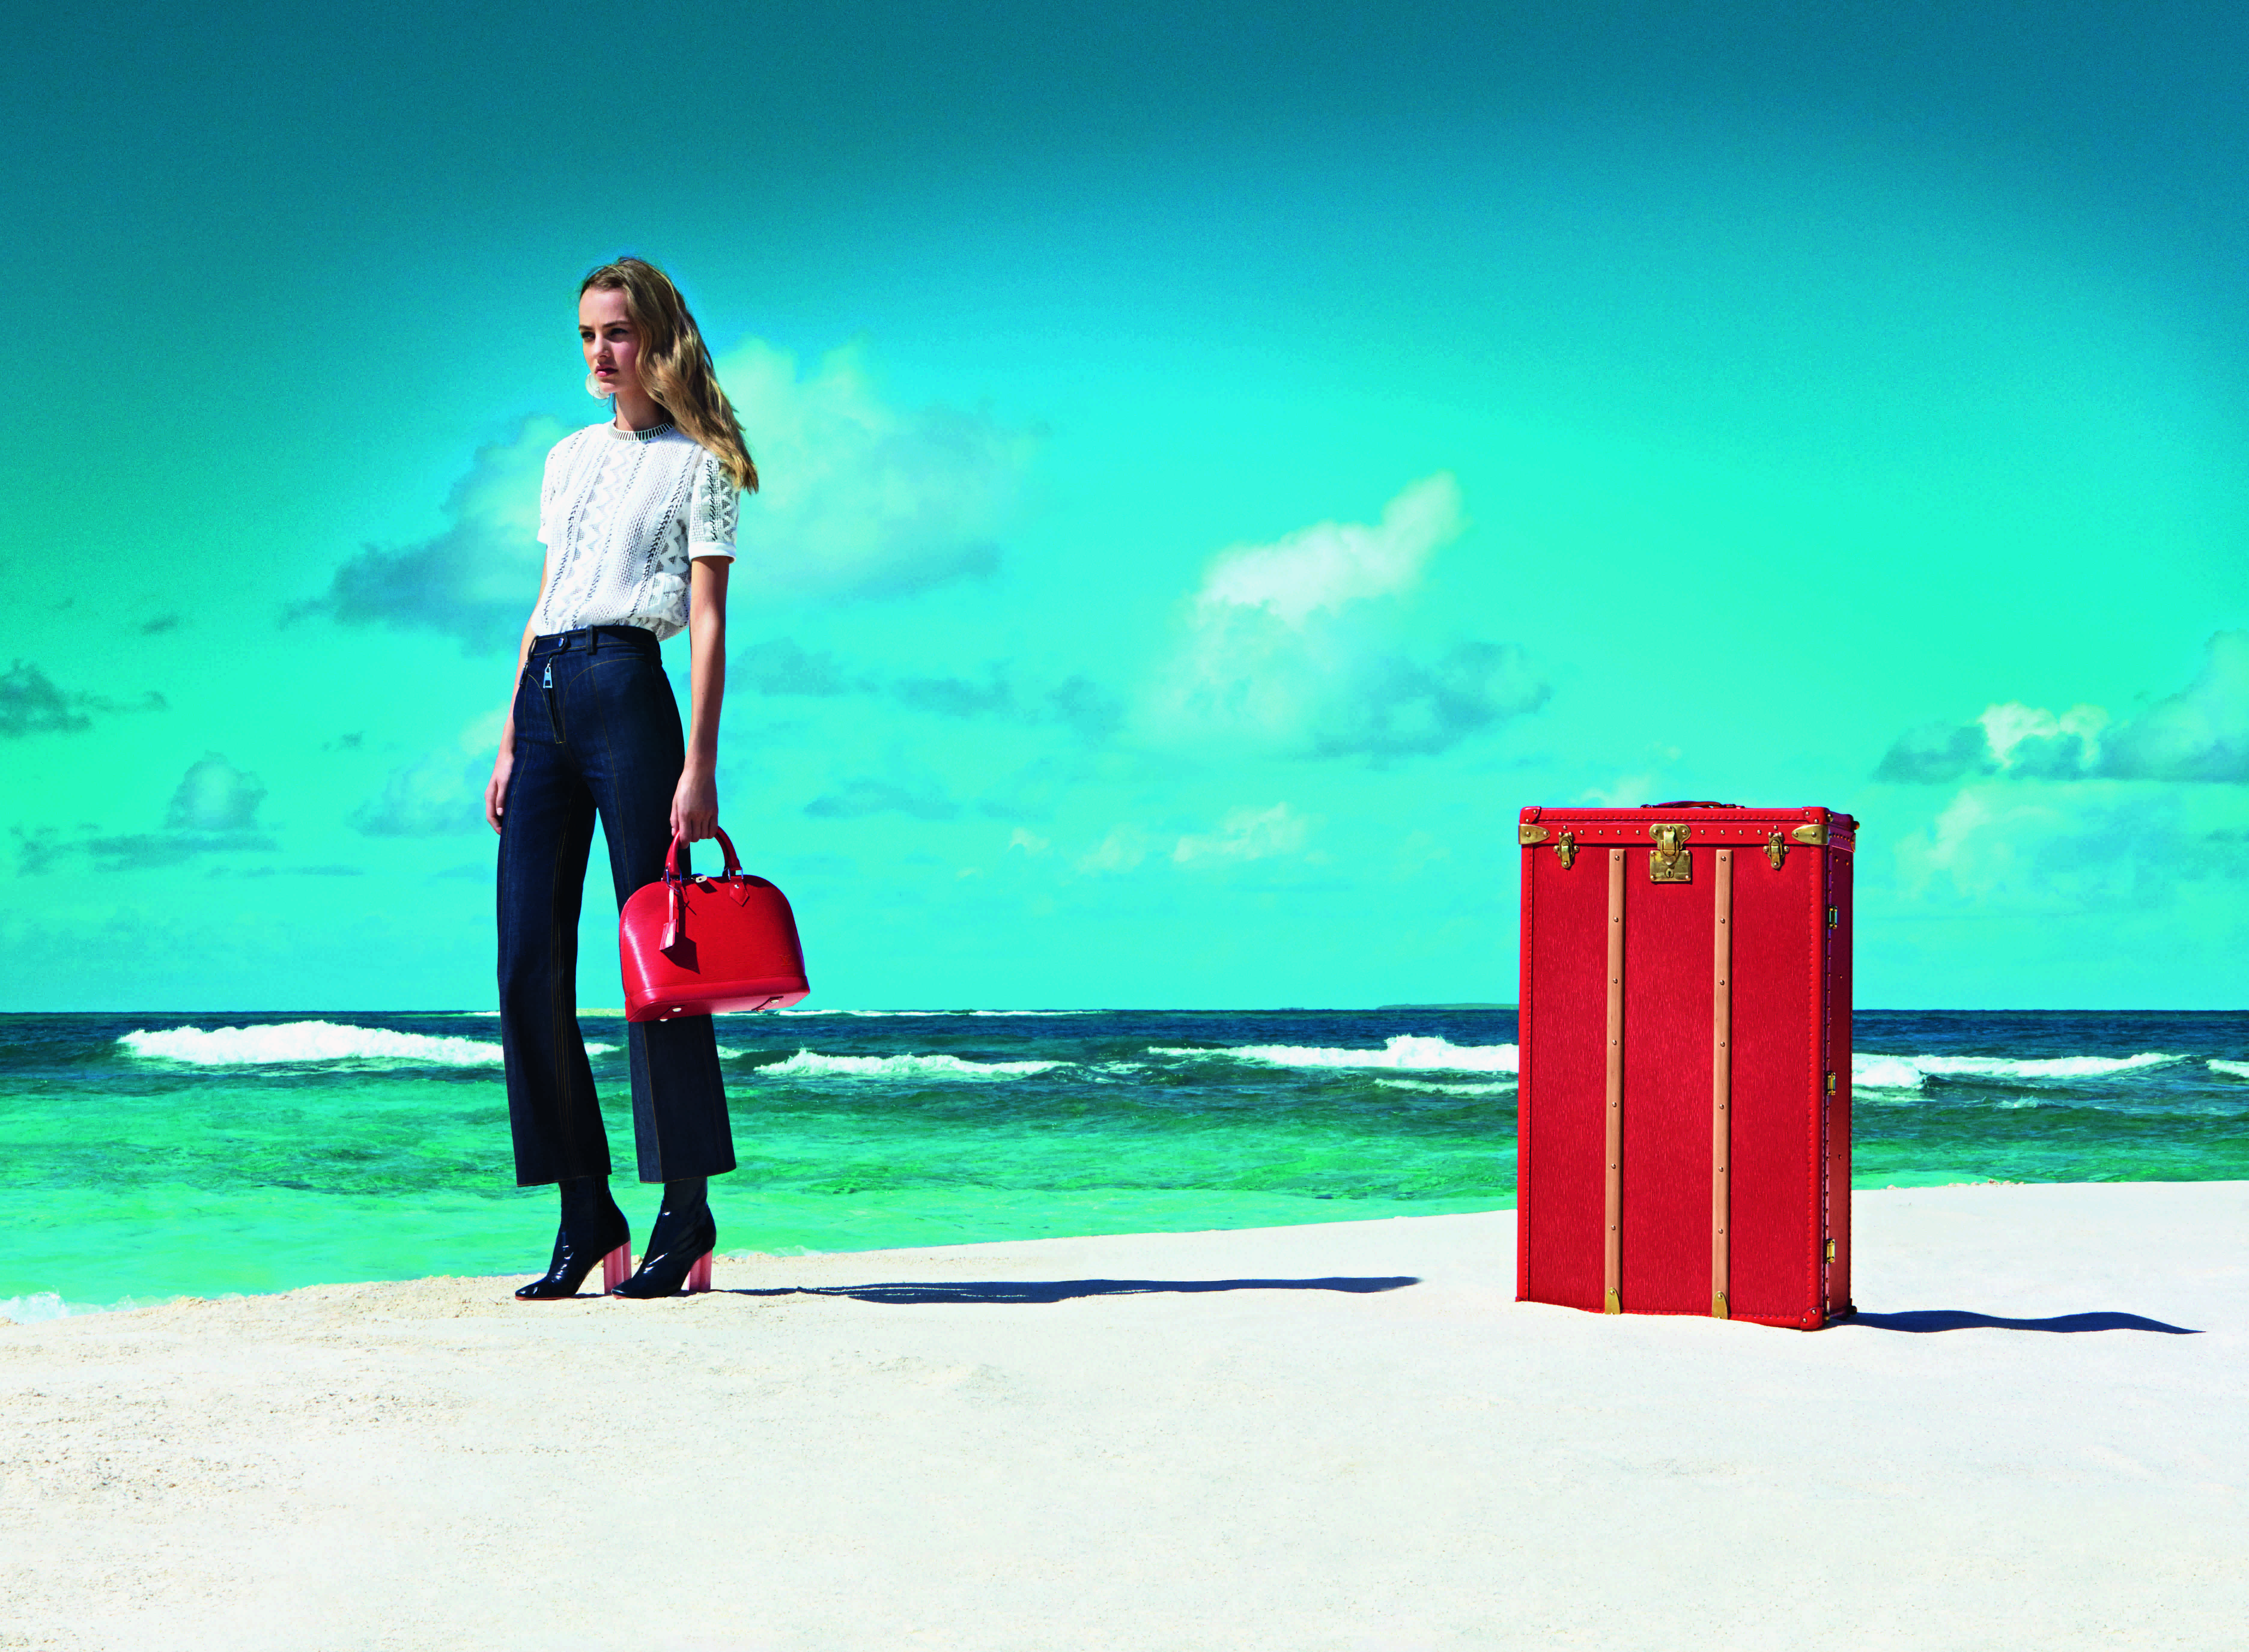 Louis Vuitton debuts its new Spirit of Travel campaign - Duty Free